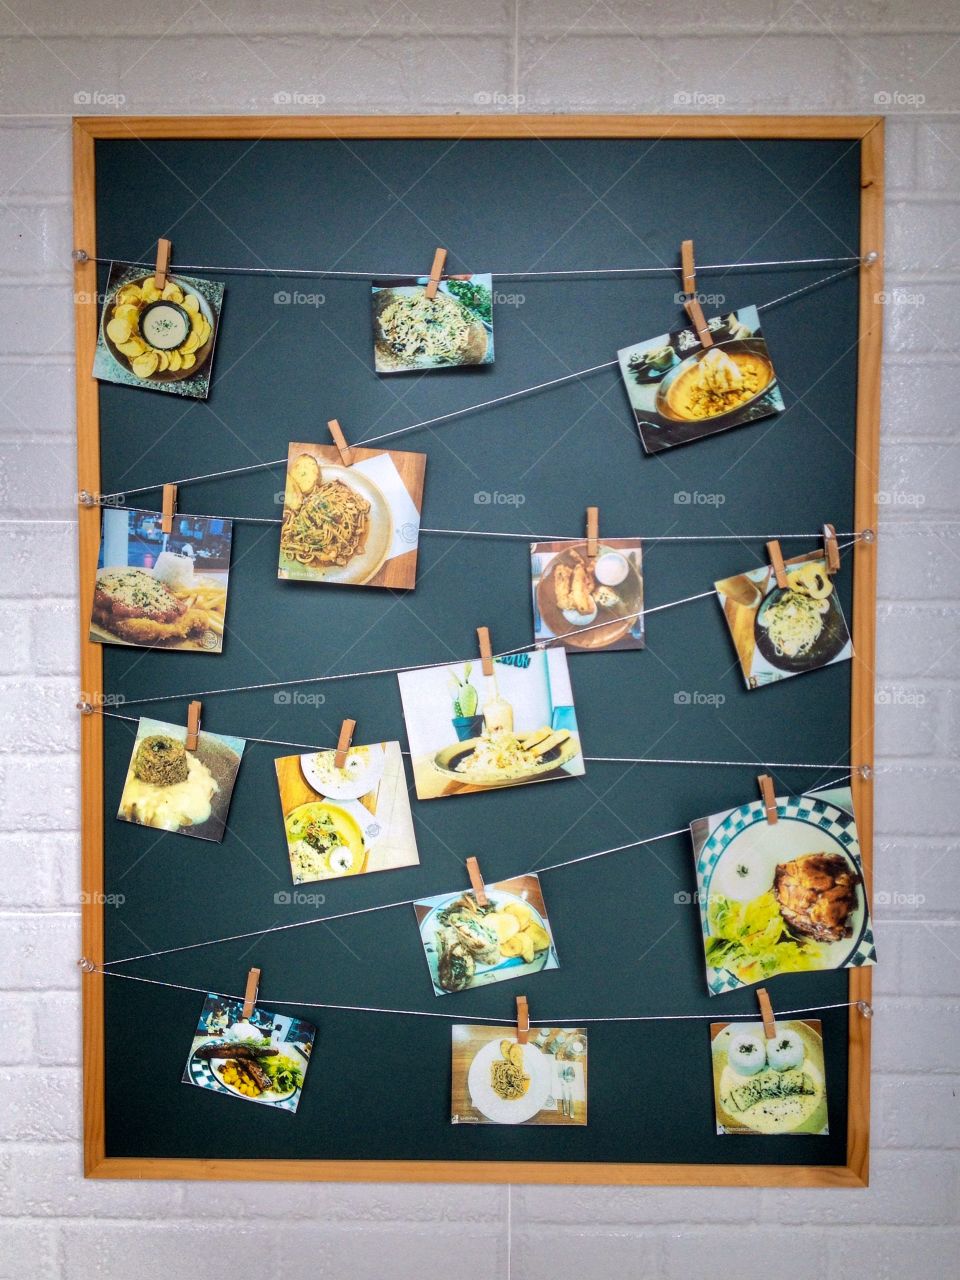 Pictures of food on the wall